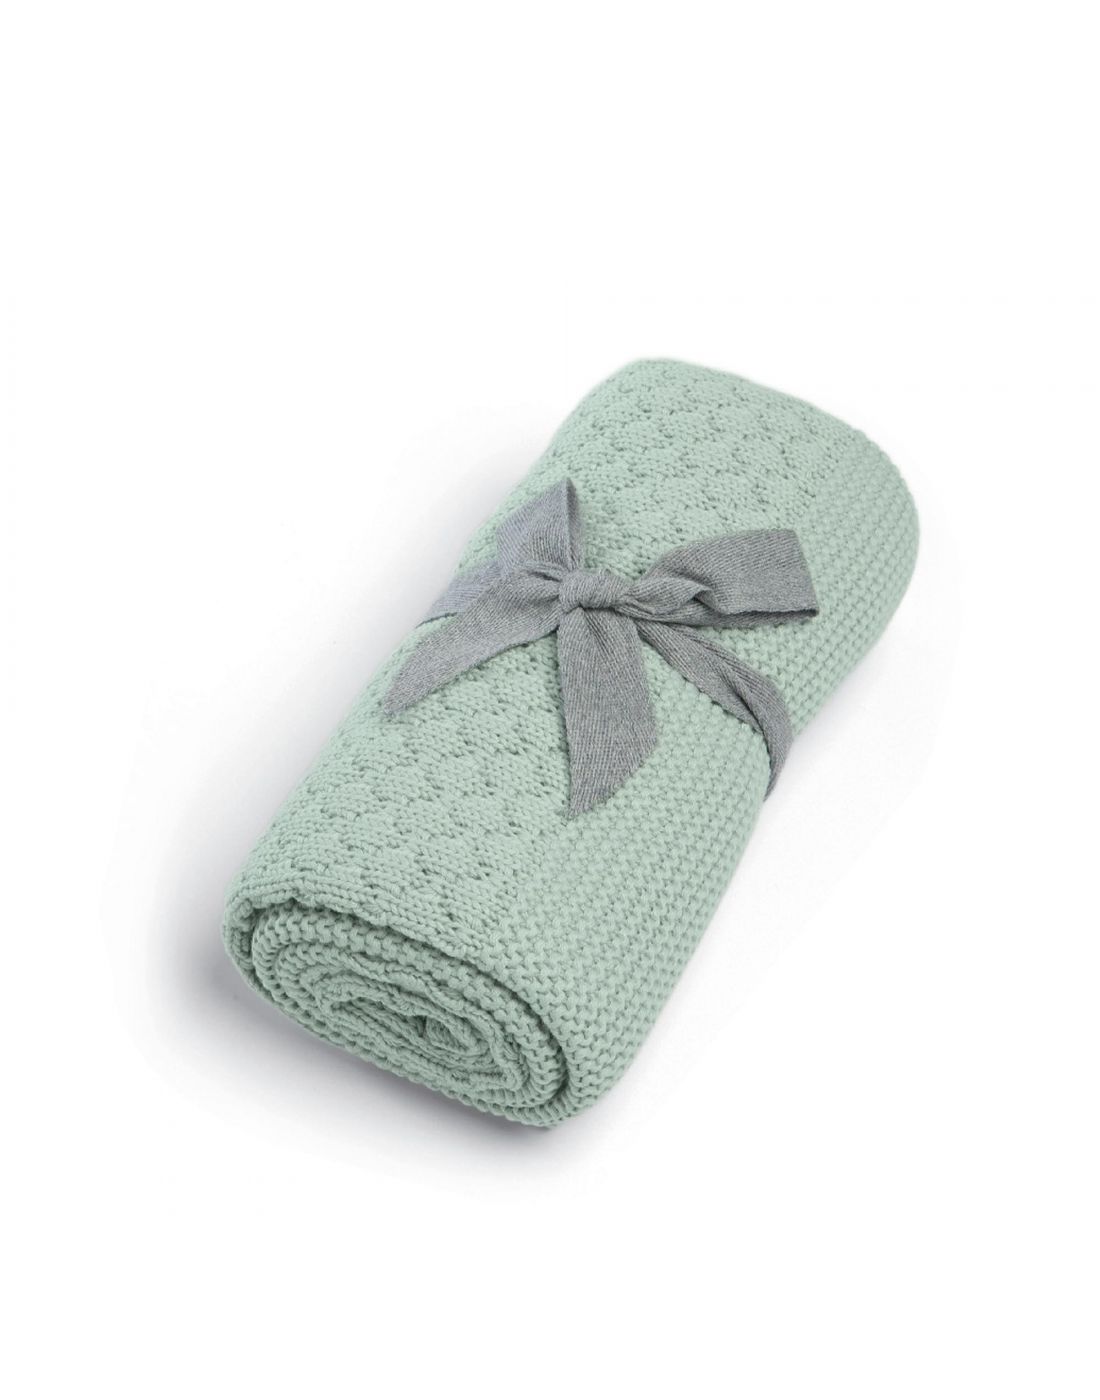 Mamas & Papas Knitted Blanket Welcome to the World Seedling Blue-green